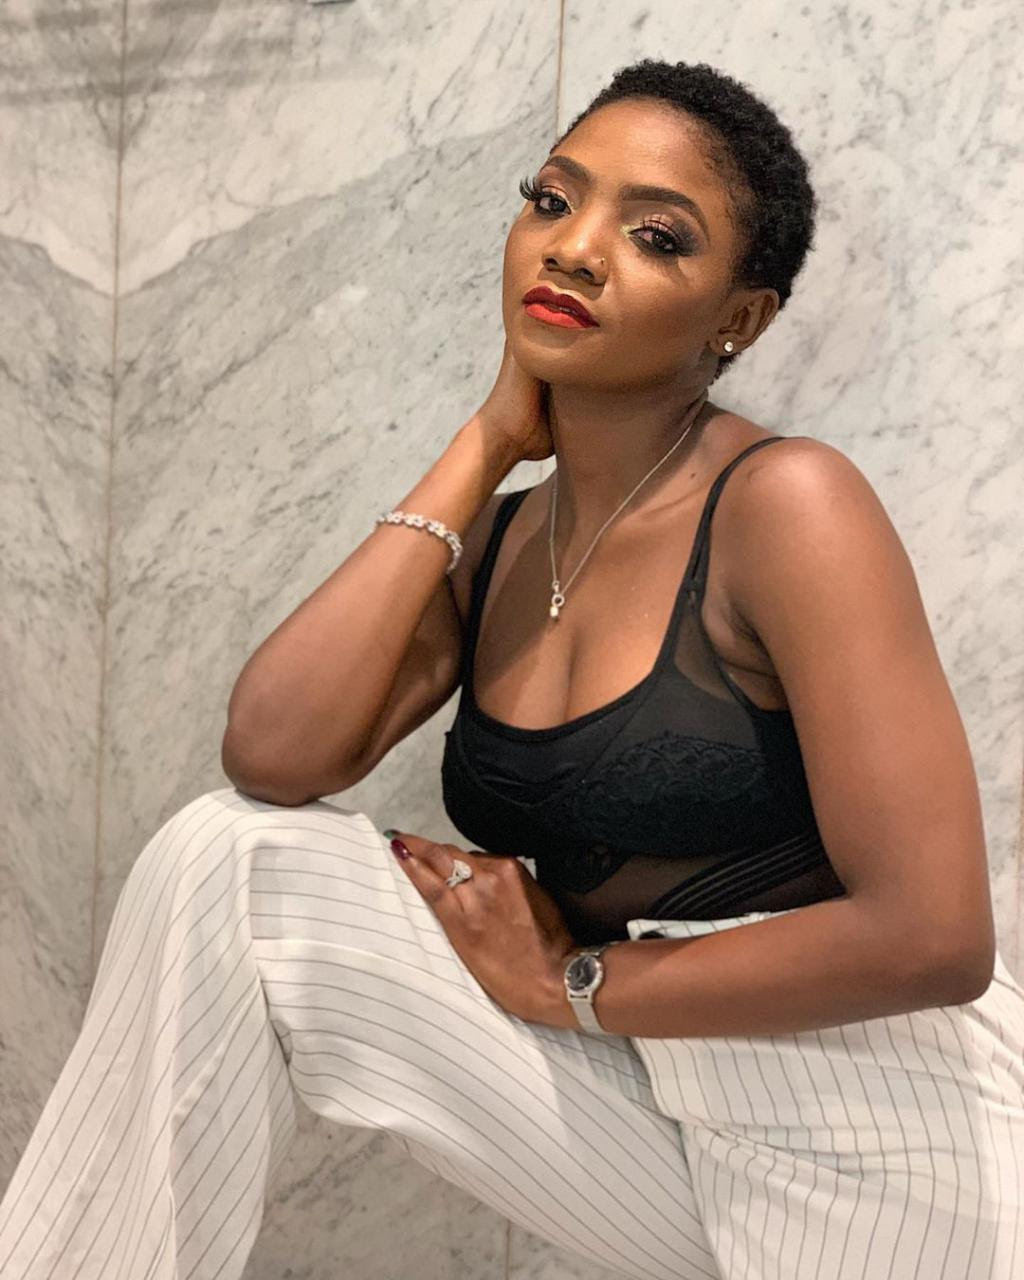 If you shame people for doing honest hard work to eat, you are dumb - Simi 